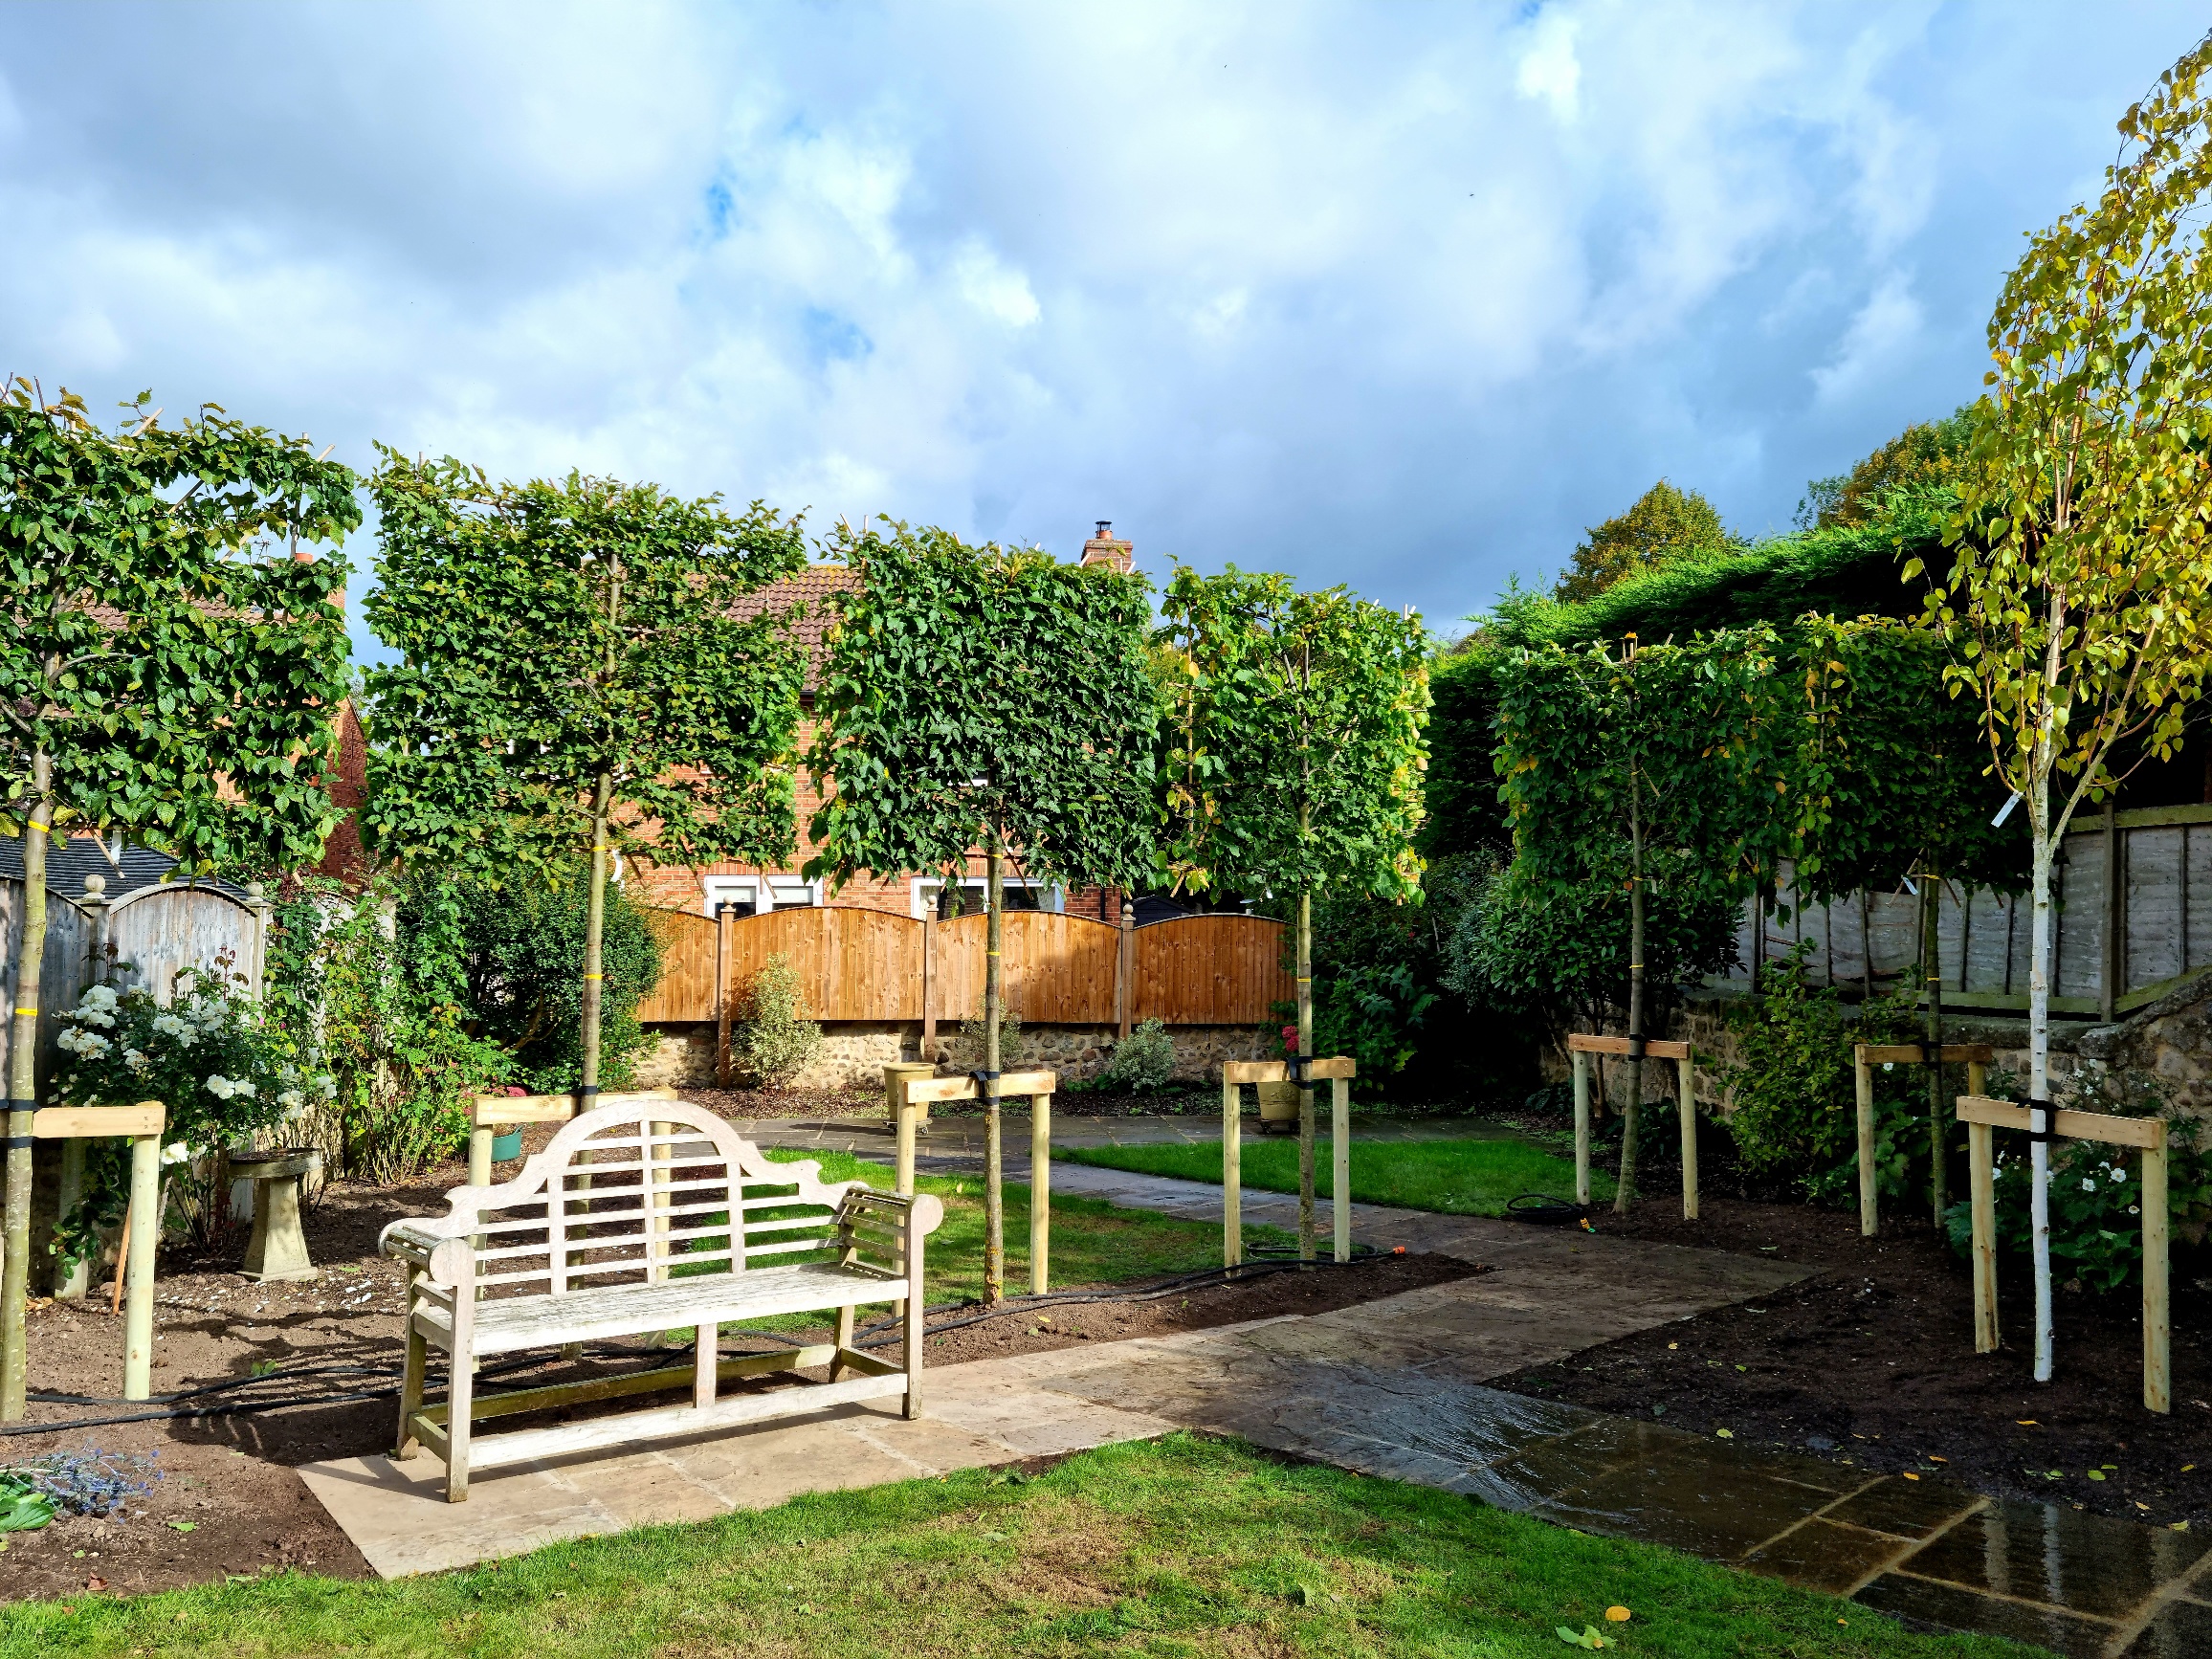 Pleached Hornbeam trees add style and screening